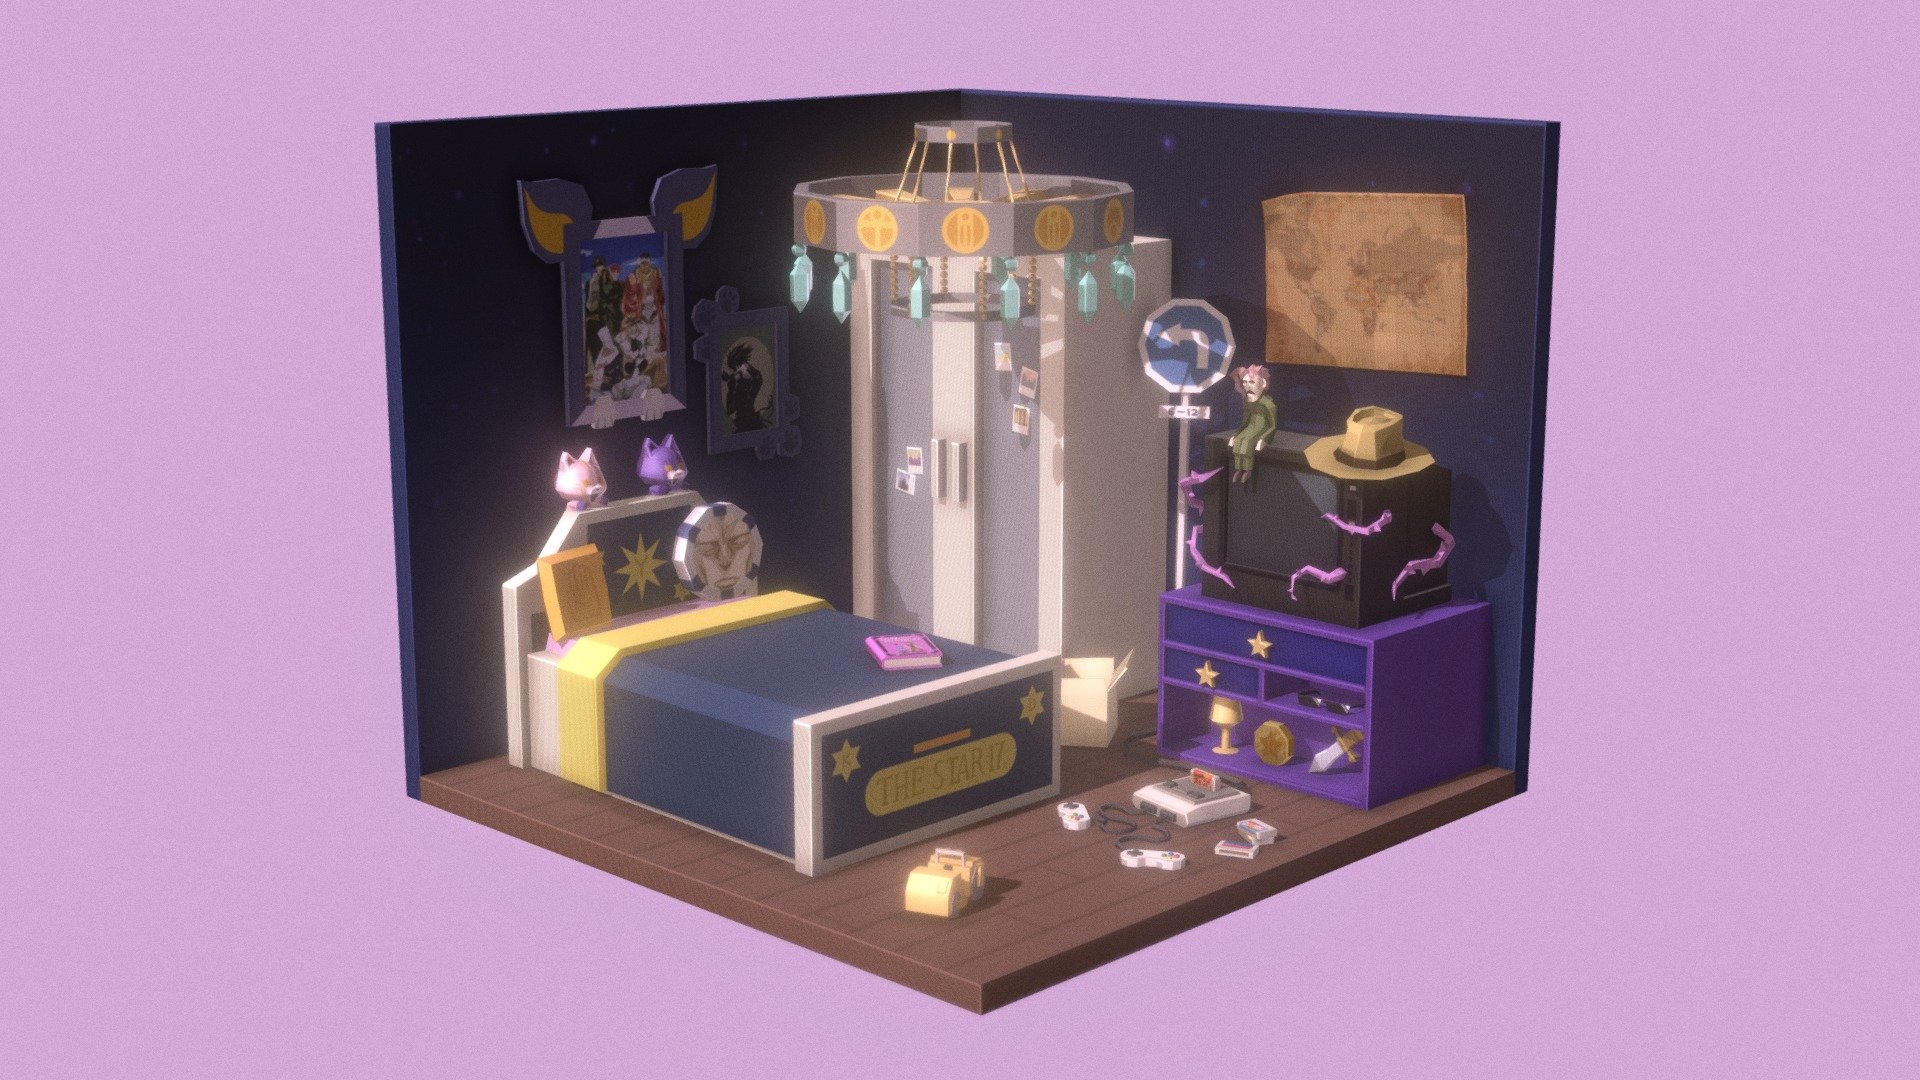 Based on one of the themed rooms in the mobile game Jojo Pitapatapop. I added some of my own personal touches tough. Tried to go for a low poly style. Modeled in Maya and textured in Photoshop.
Still new to 3D modeling, but this was a fun mini project!

Follow me on Instagram: http://instagram.com/wildreamz - Stardust Crusaders Room - 3D model by wildreamz 3d model